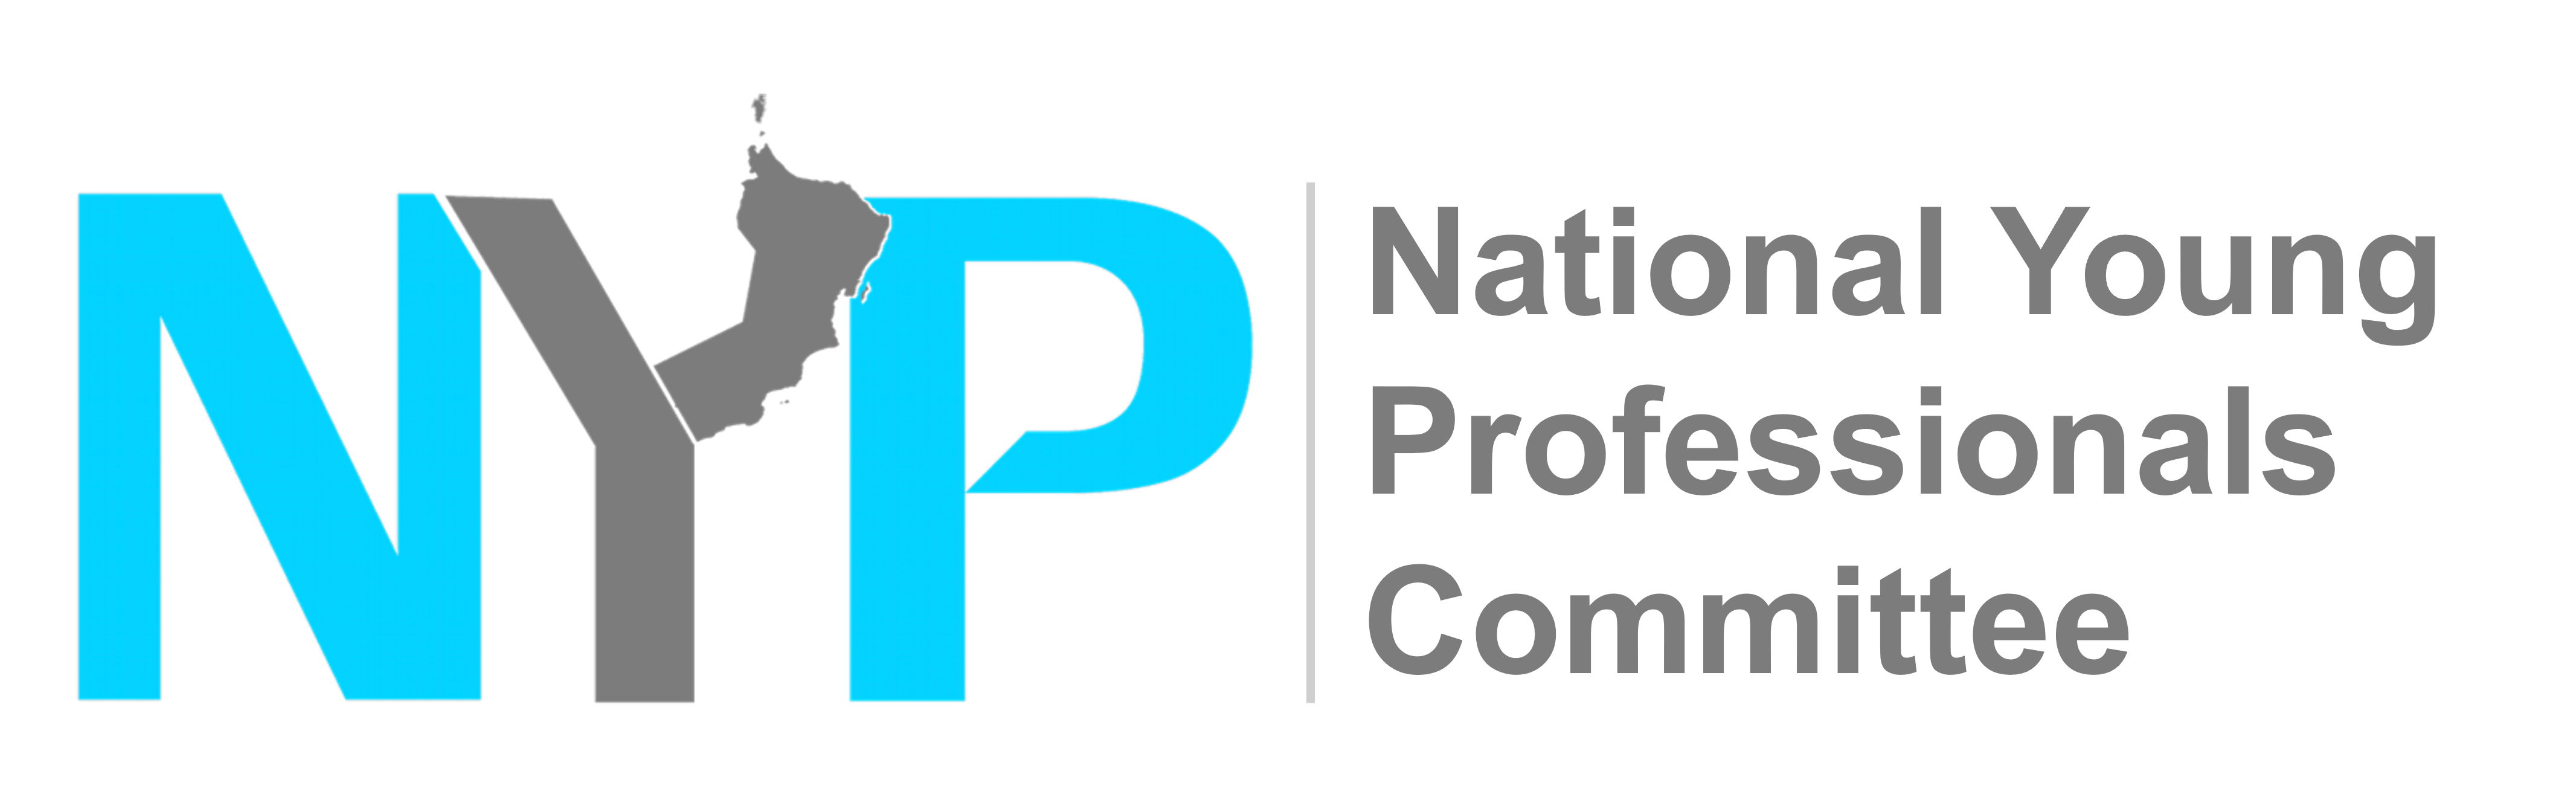 National Young Professionals